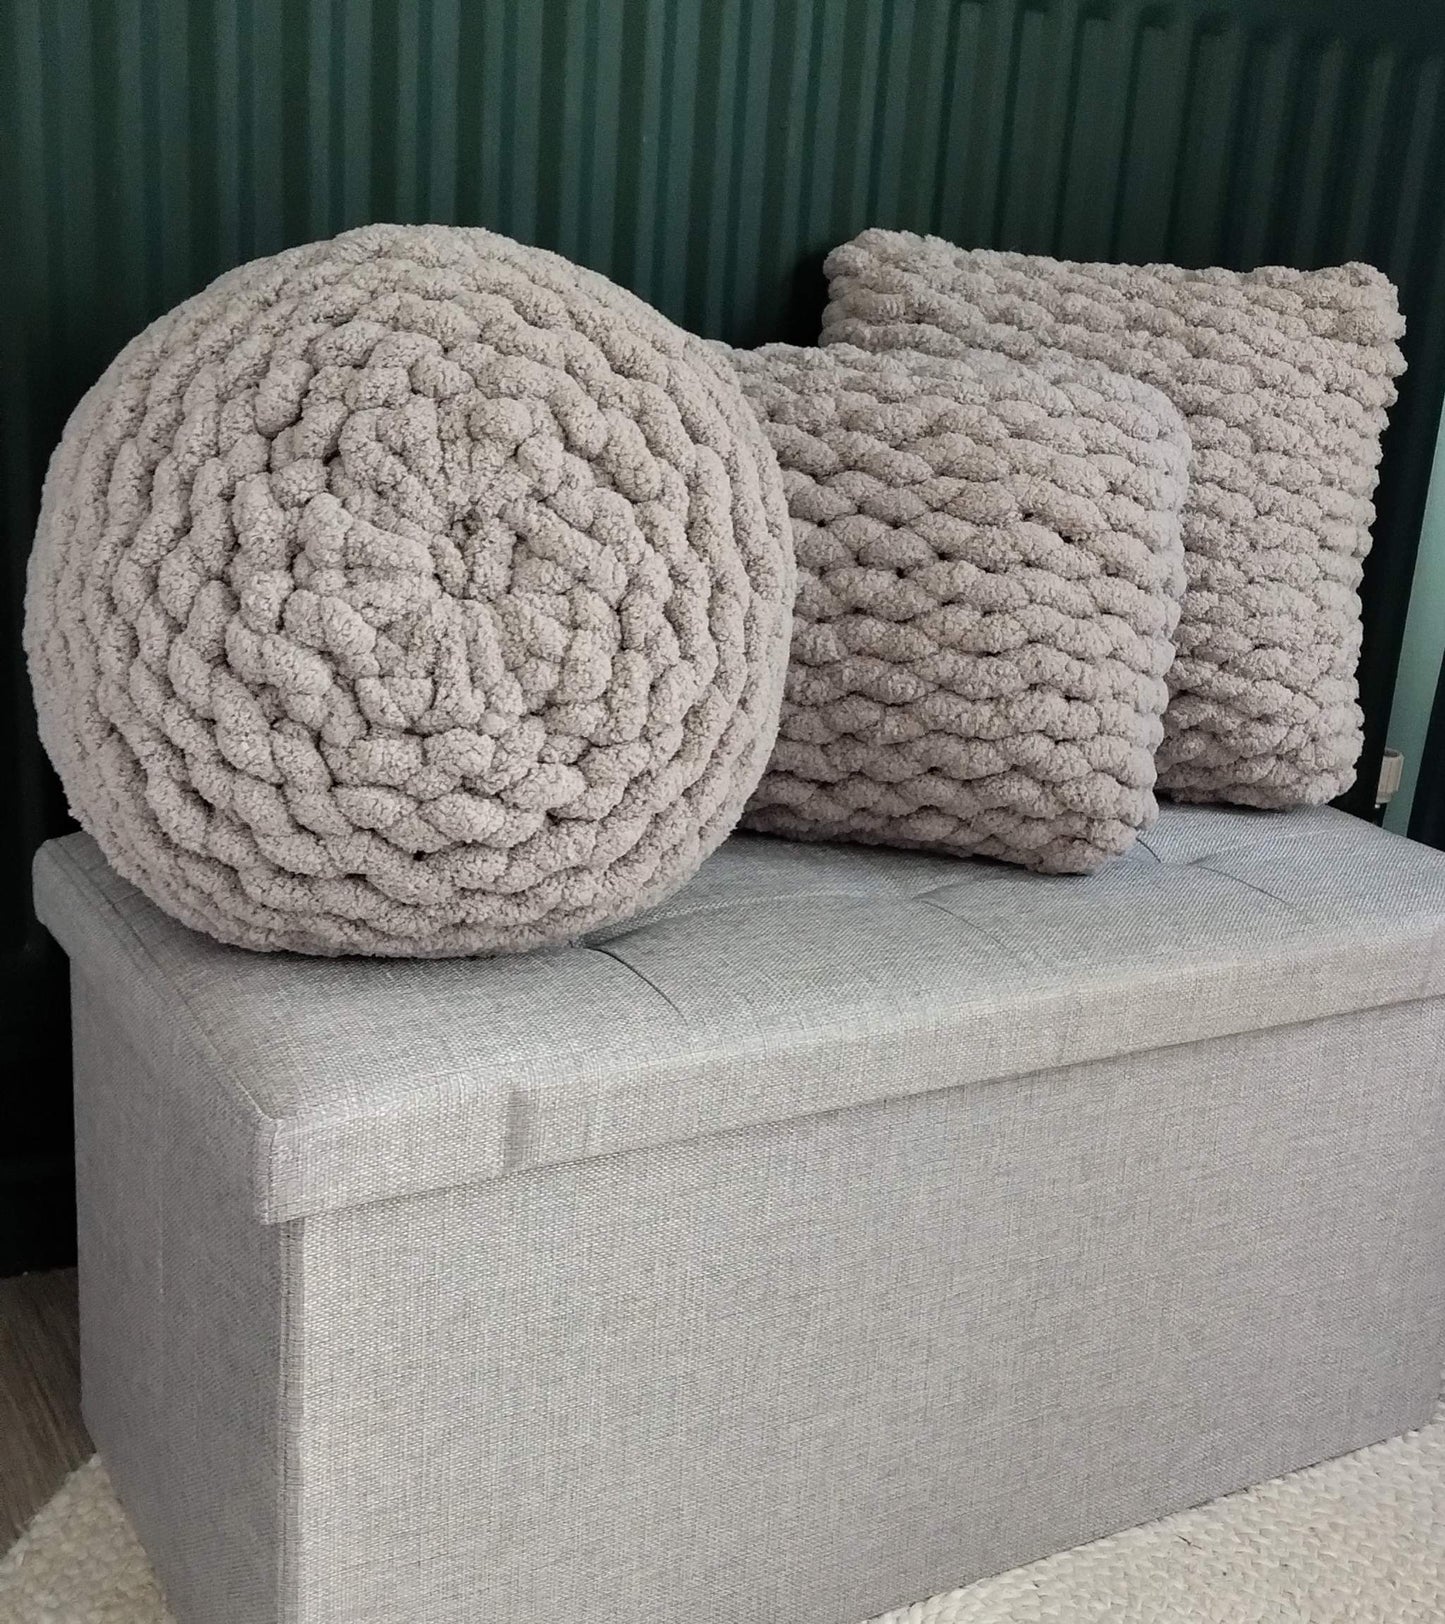 set of 3 hand knit cushions offer in chunky chenille yarn - grey